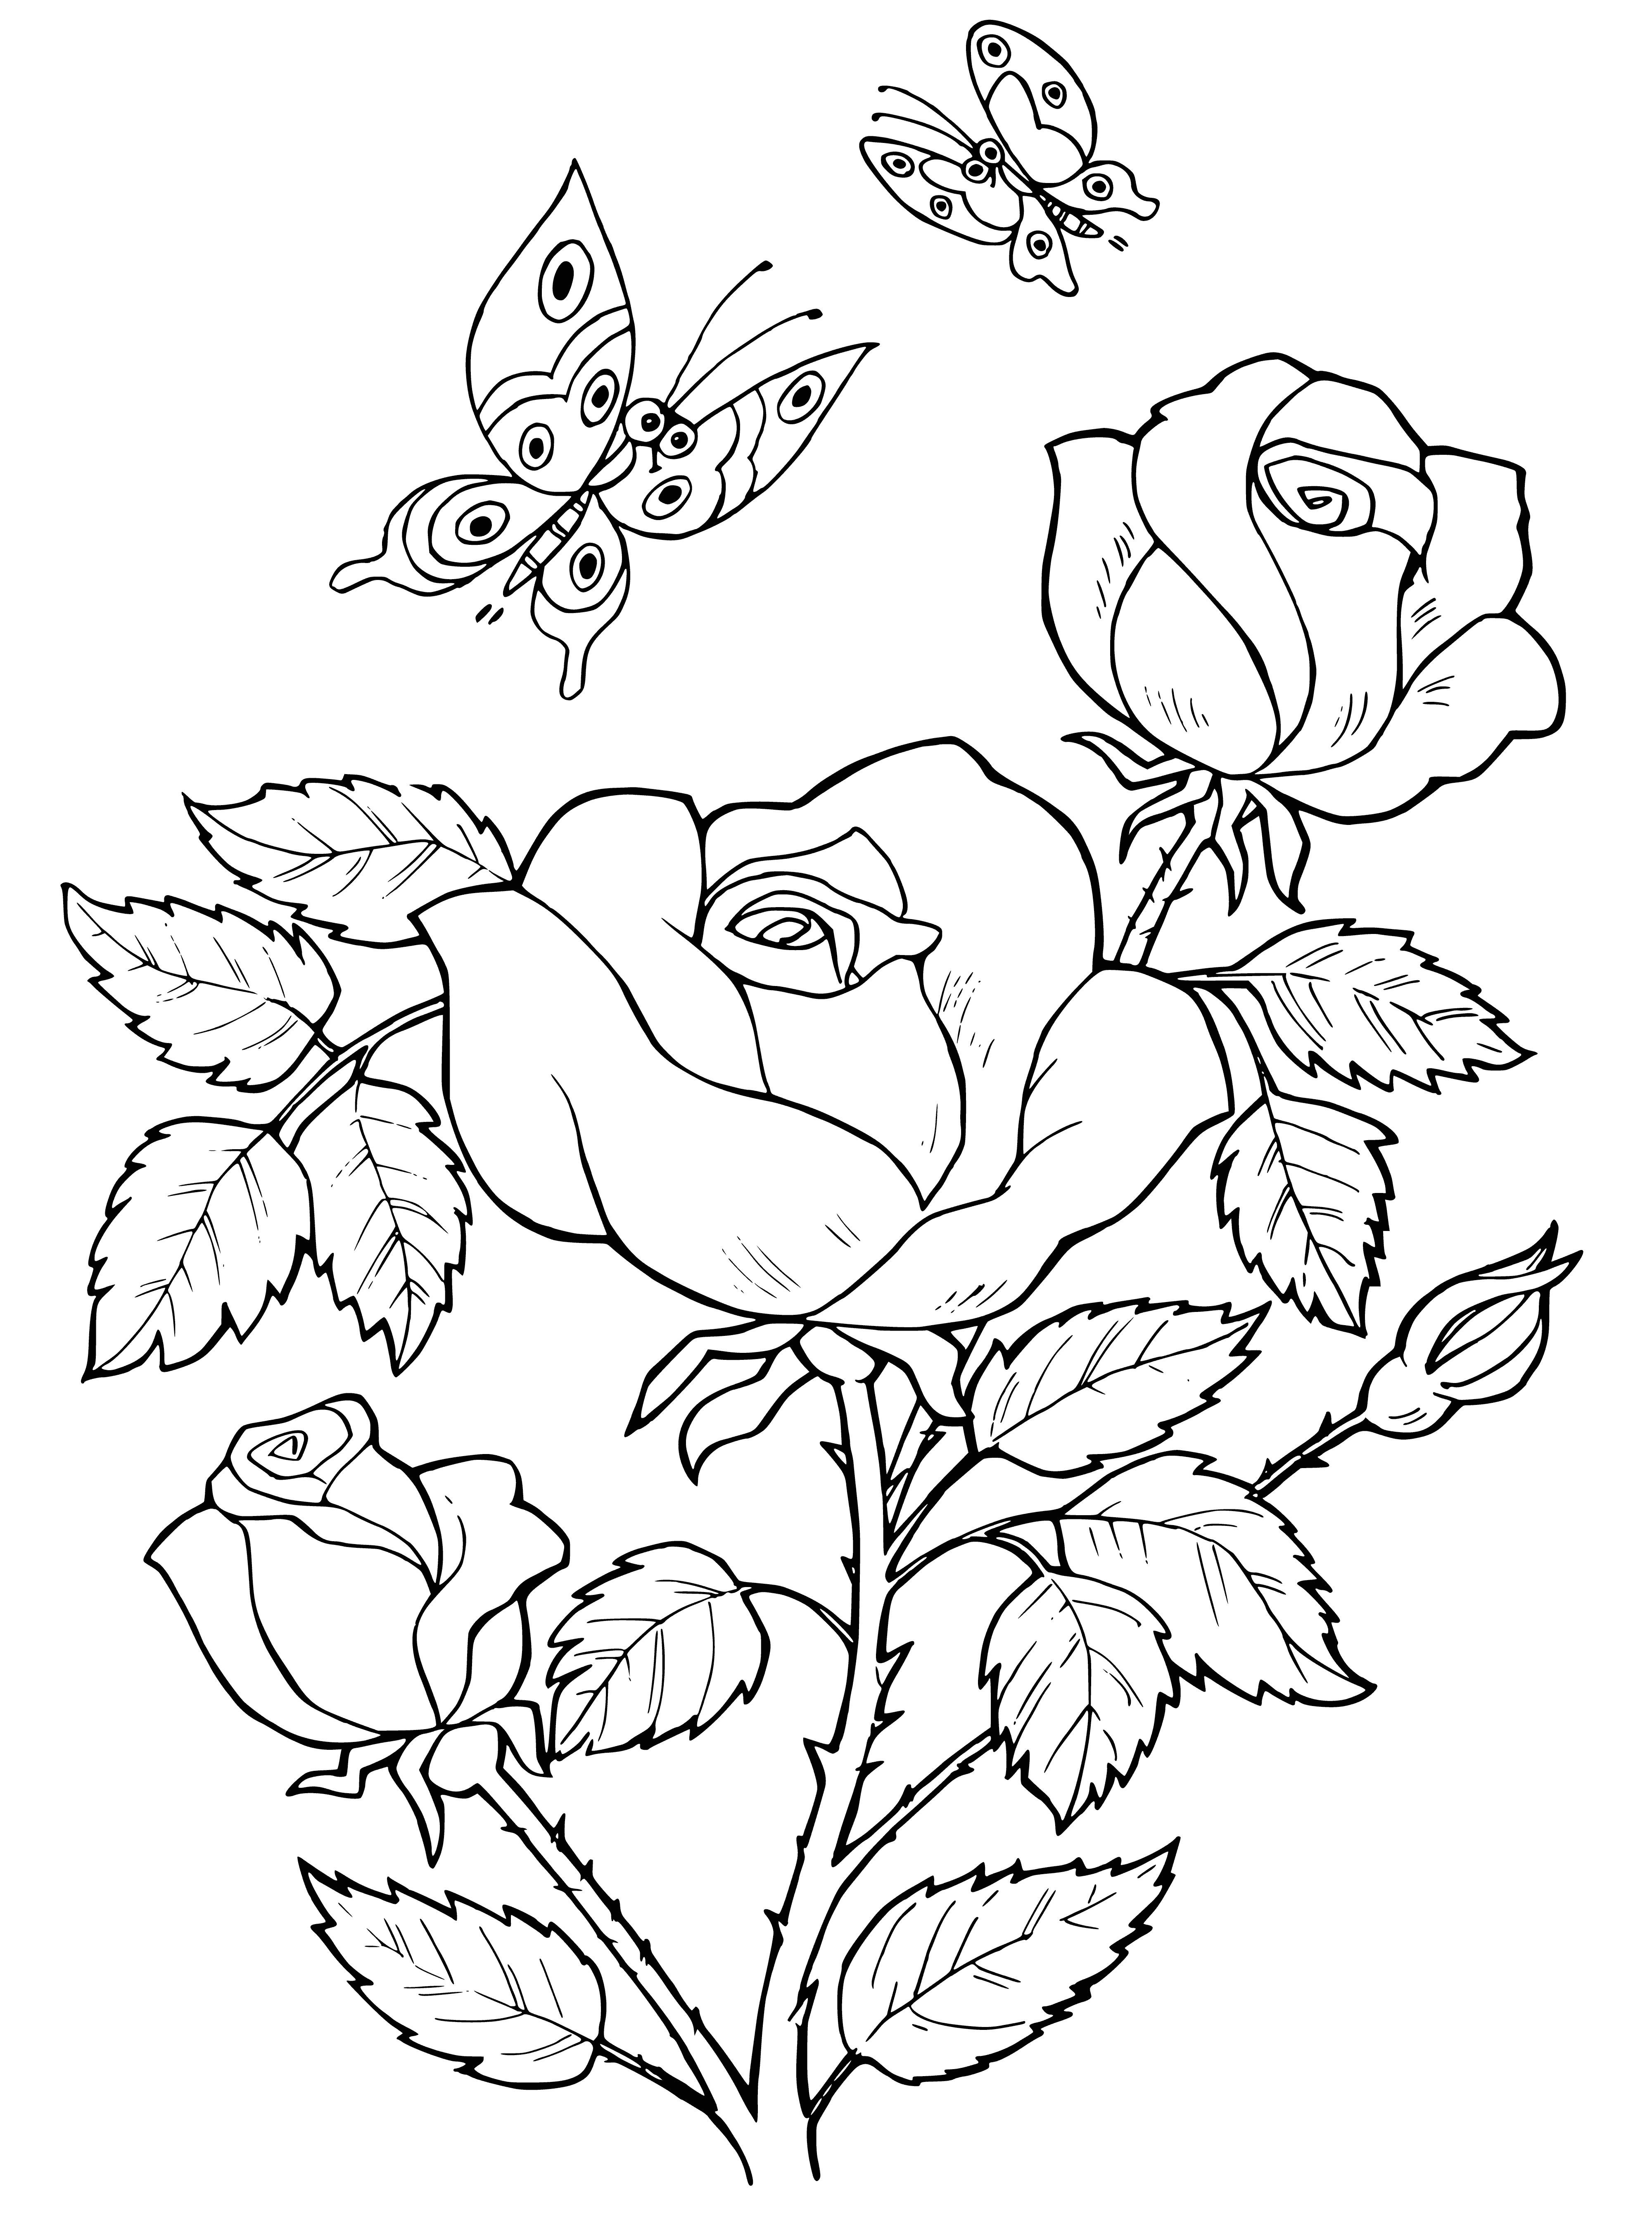 coloring page: Roses are thorned bushes with cup-shaped flowers, usually red but can also be pink, white, or purple w/a yellow center.